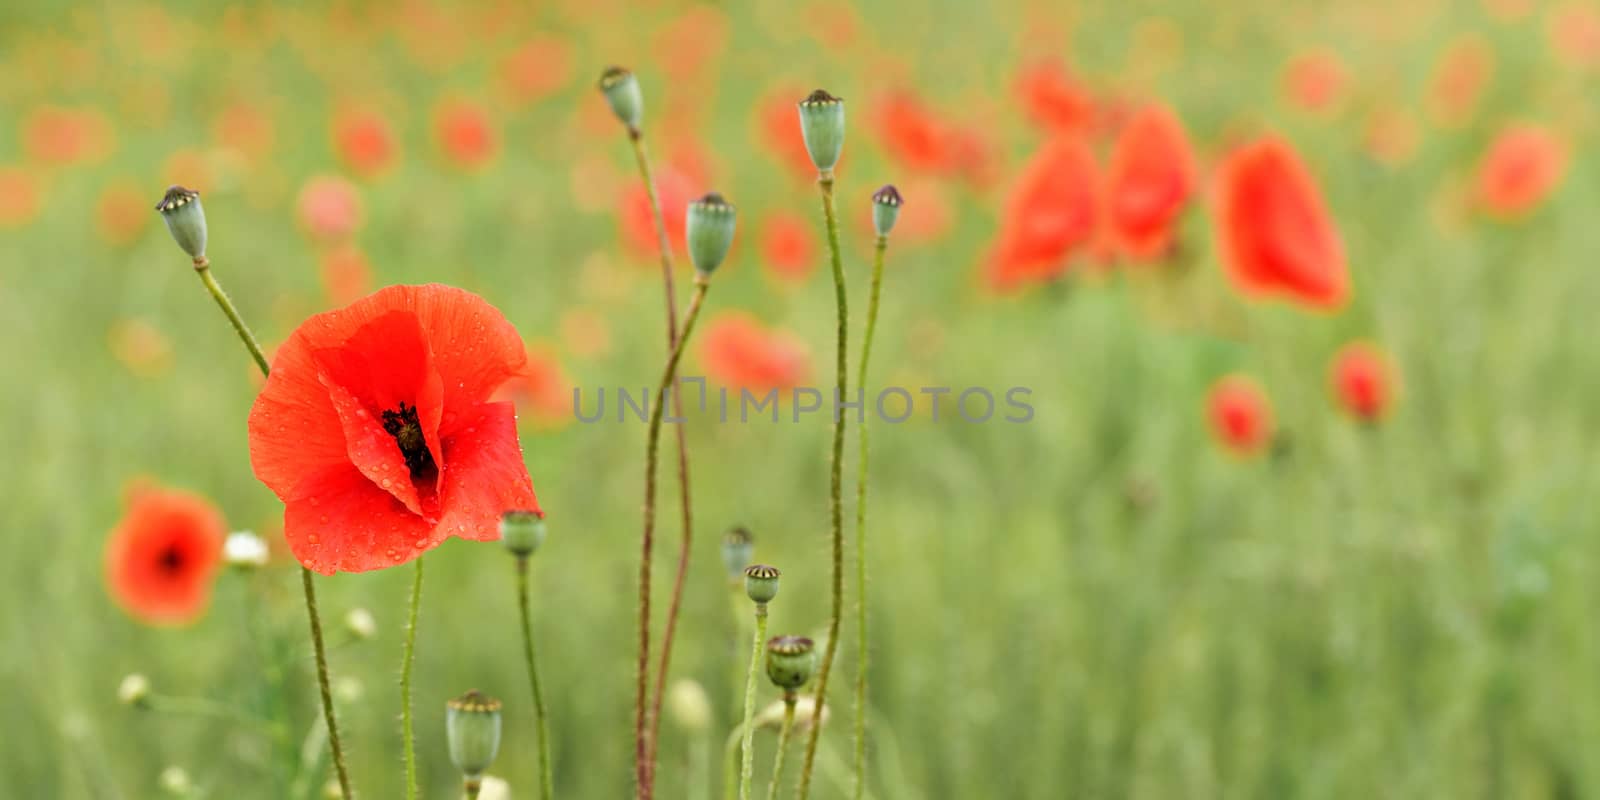 Bright red wild poppy flowers growing in field of green unripe wheat - closeup detail, space for text right side by Ivanko